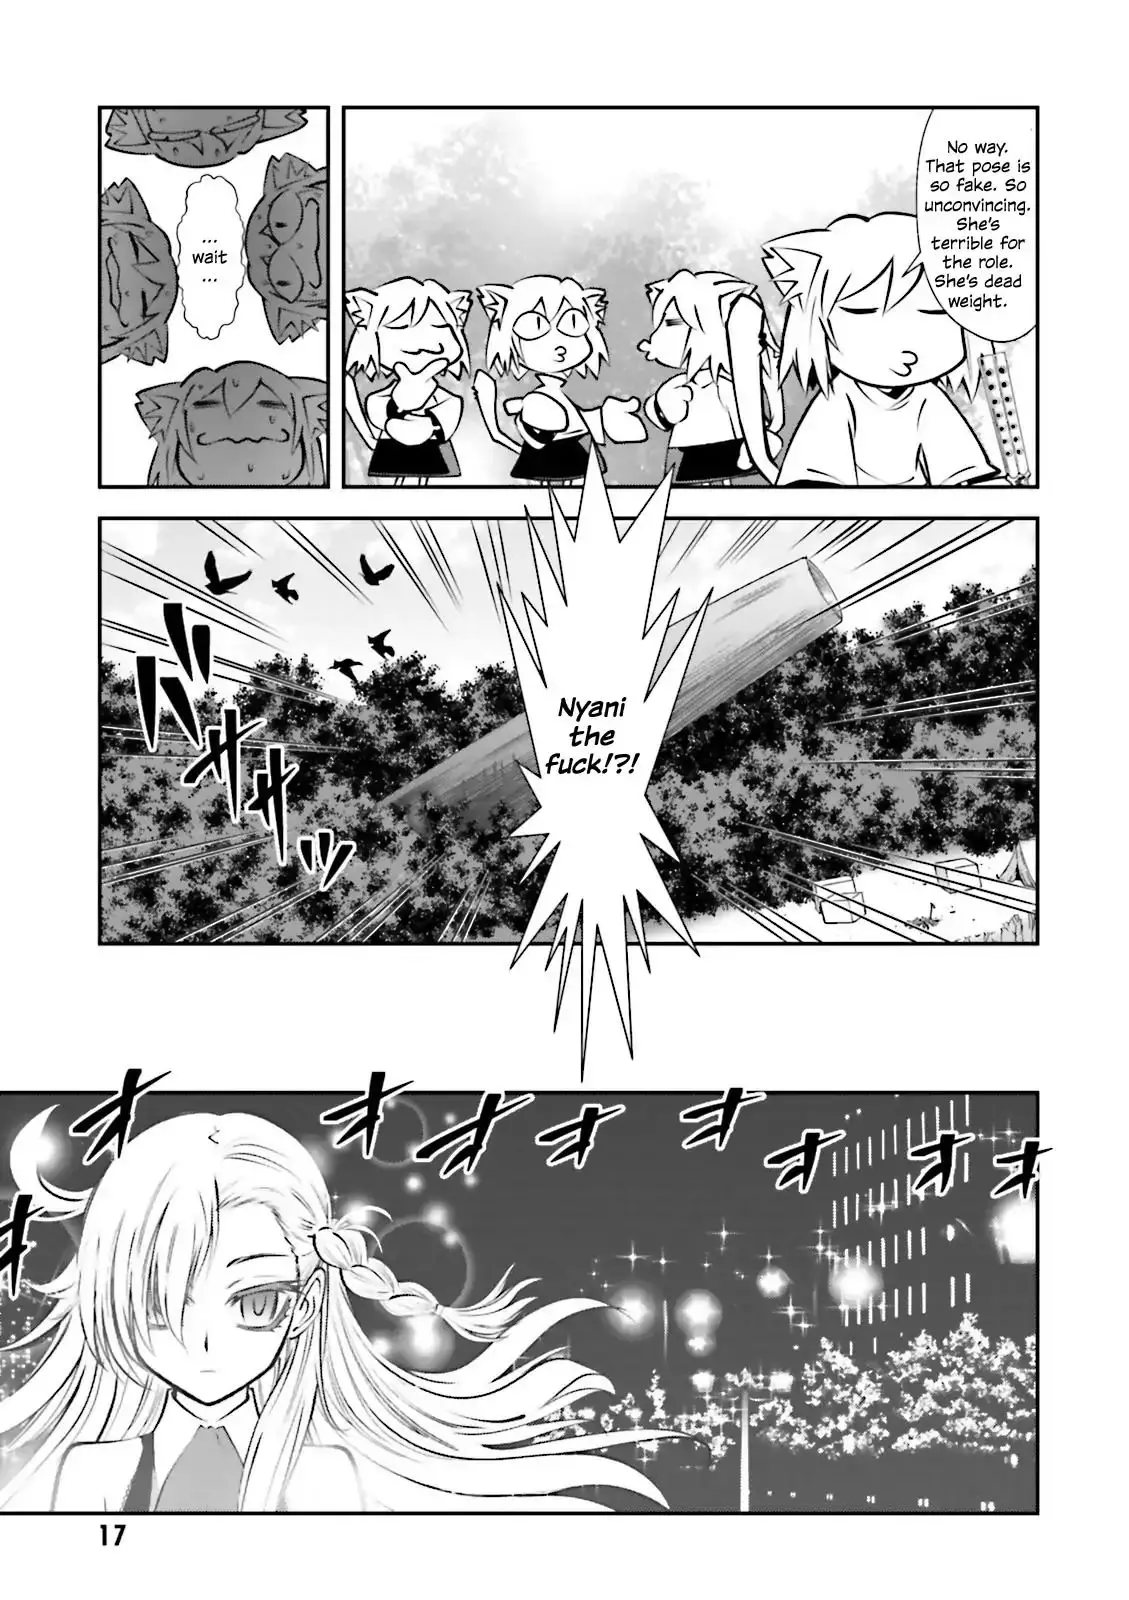 Melty Blood - Back Alley Alliance Nightmare - 6 page 16